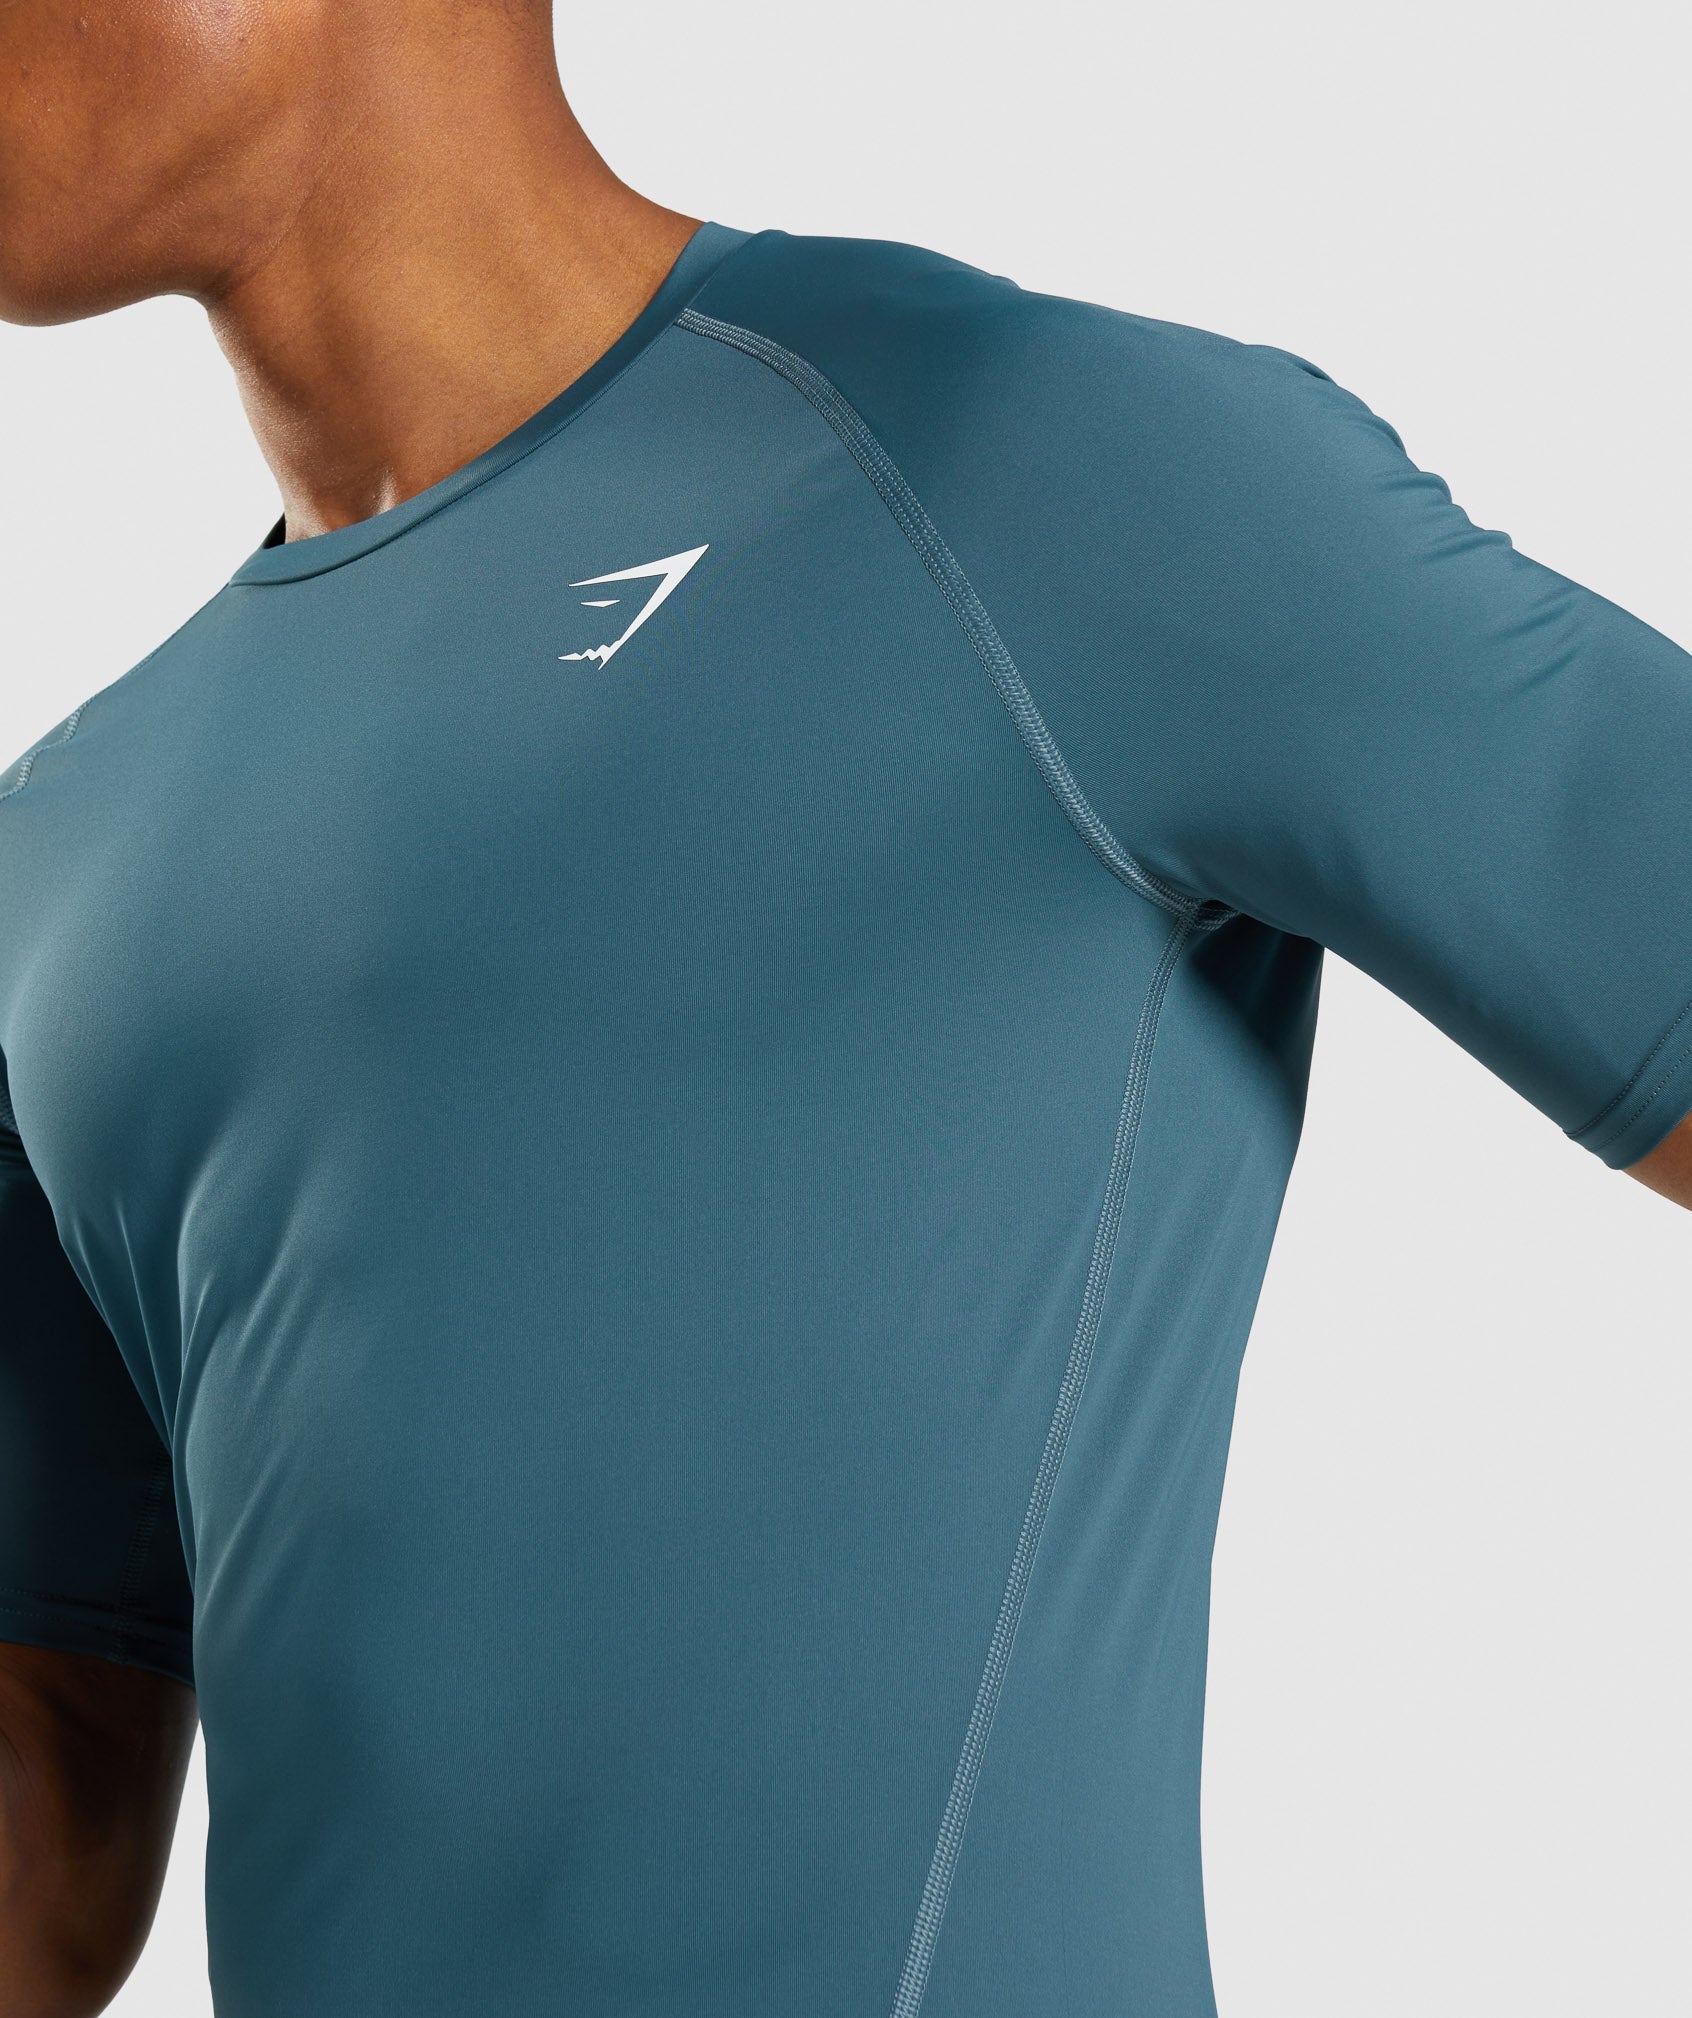 Element Baselayer T-Shirt in Tuscan Teal - view 6